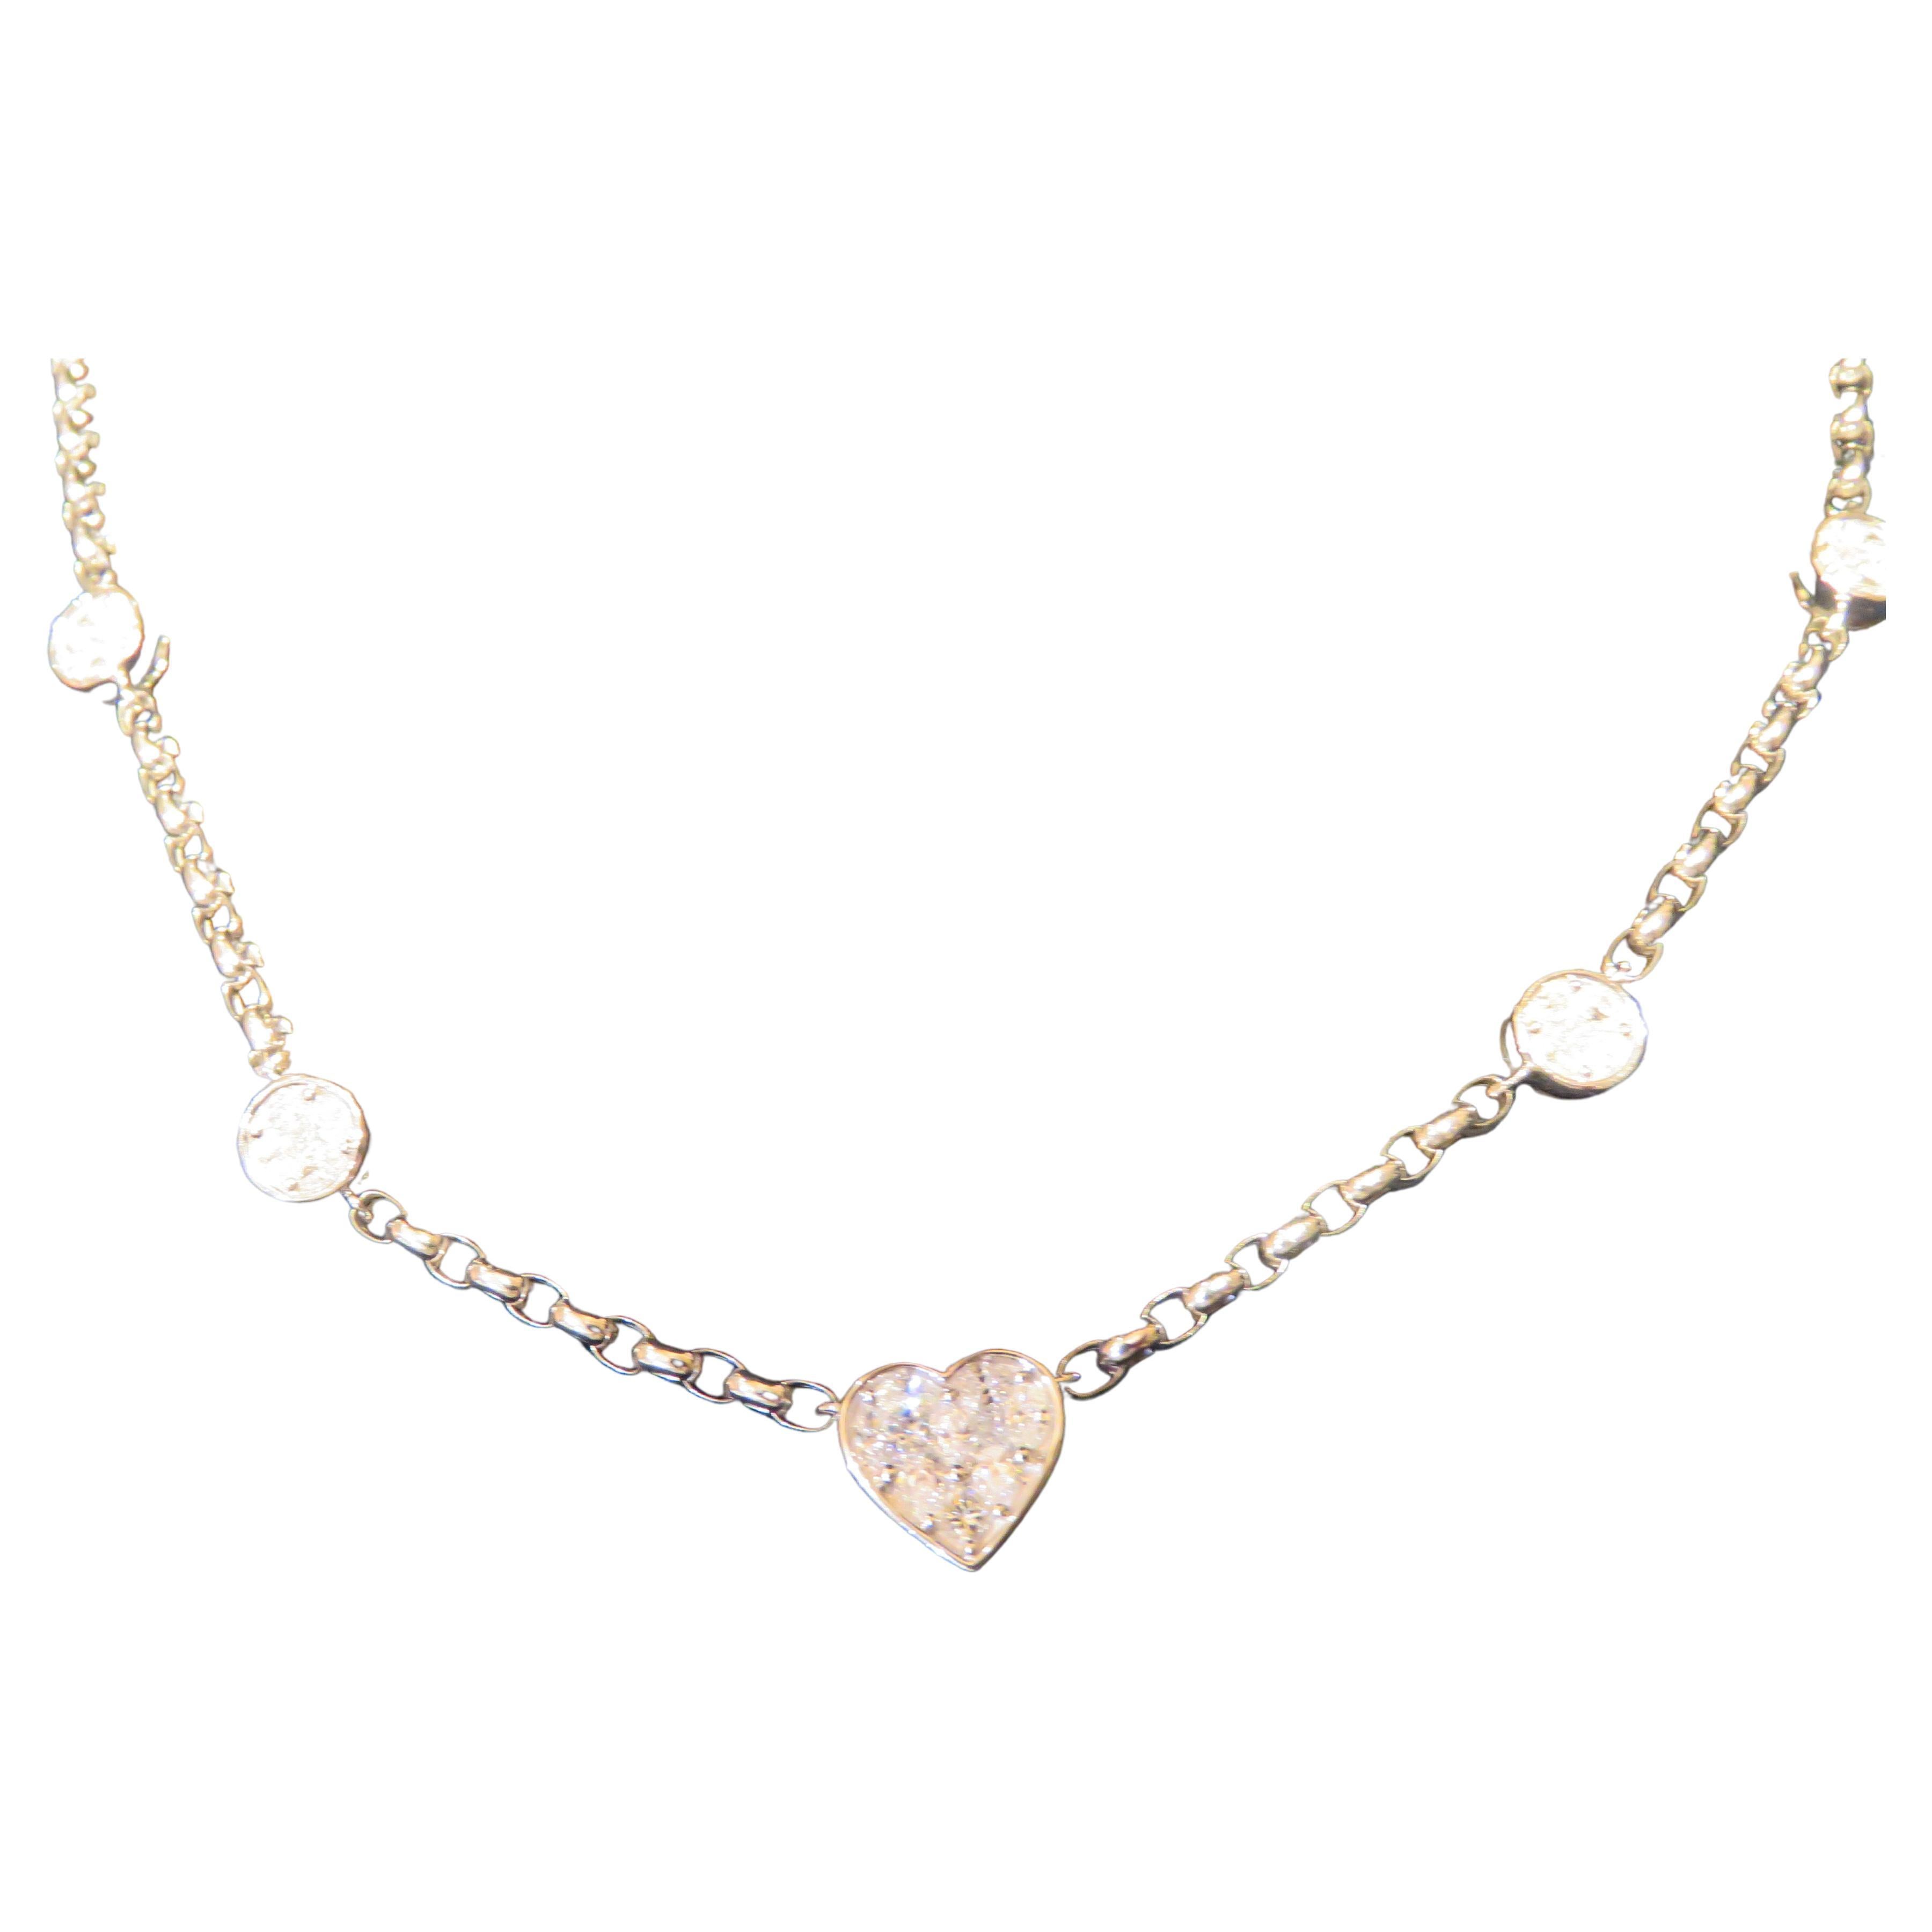 NWT $17, 812 18KT Gold Glittering Fancy Pave Heart and Round Diamond Necklace For Sale